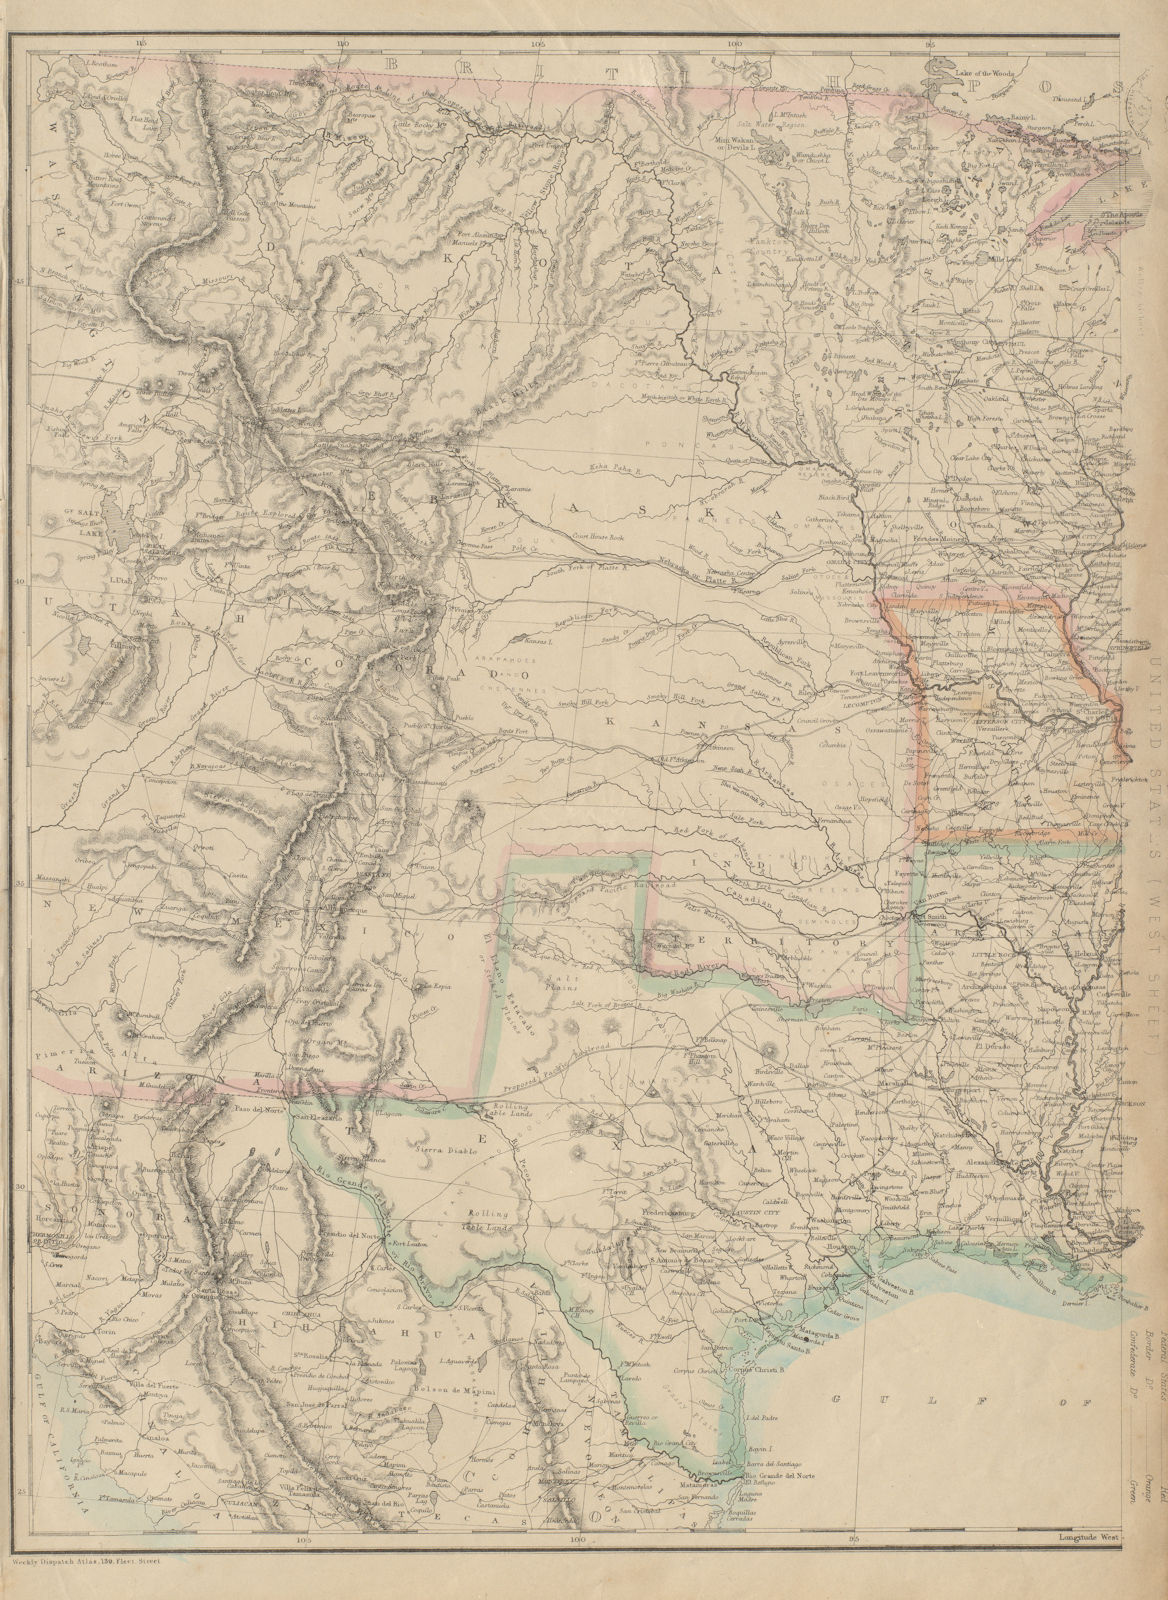 CENTRAL CIVIL WAR USA. Union & Confederate states Texas. ETTLING 1863 old map